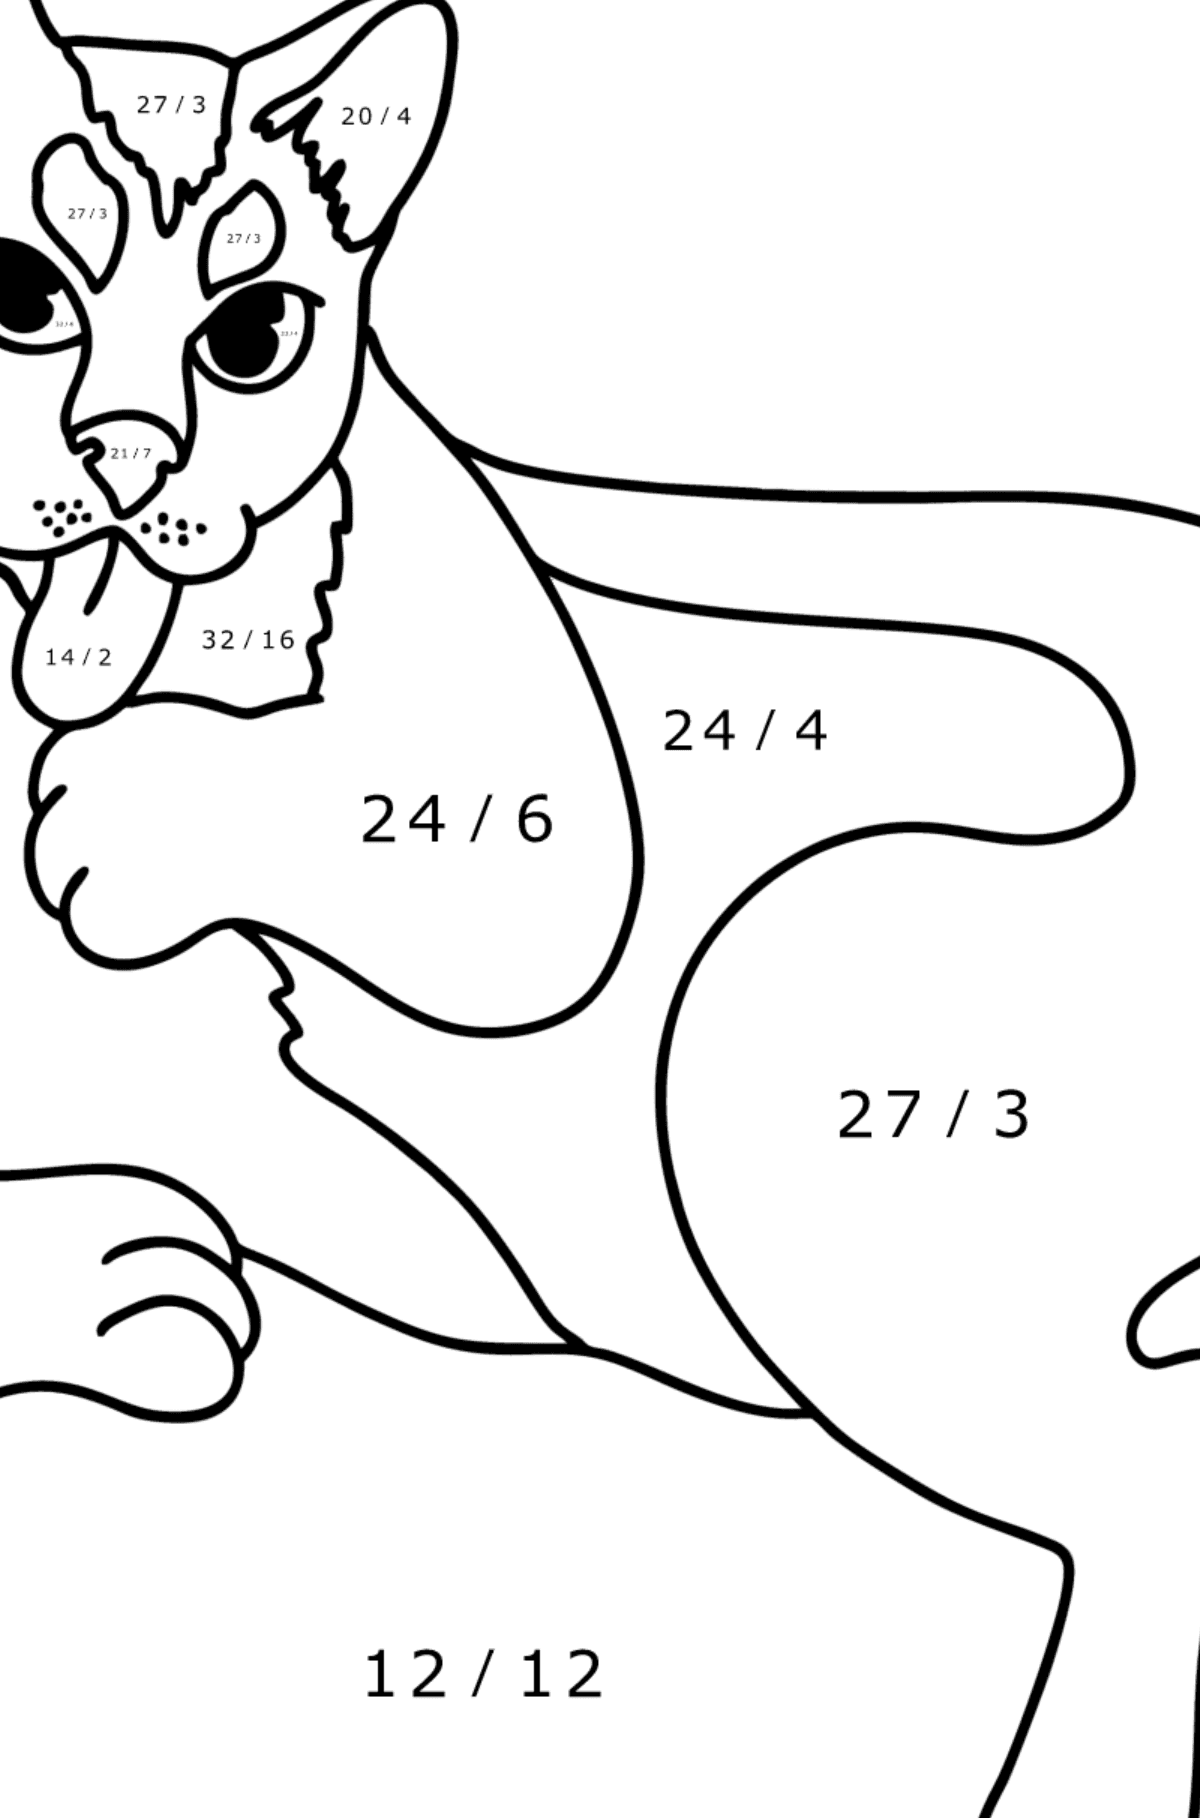 Black Cat coloring page - Math Coloring - Division for Kids